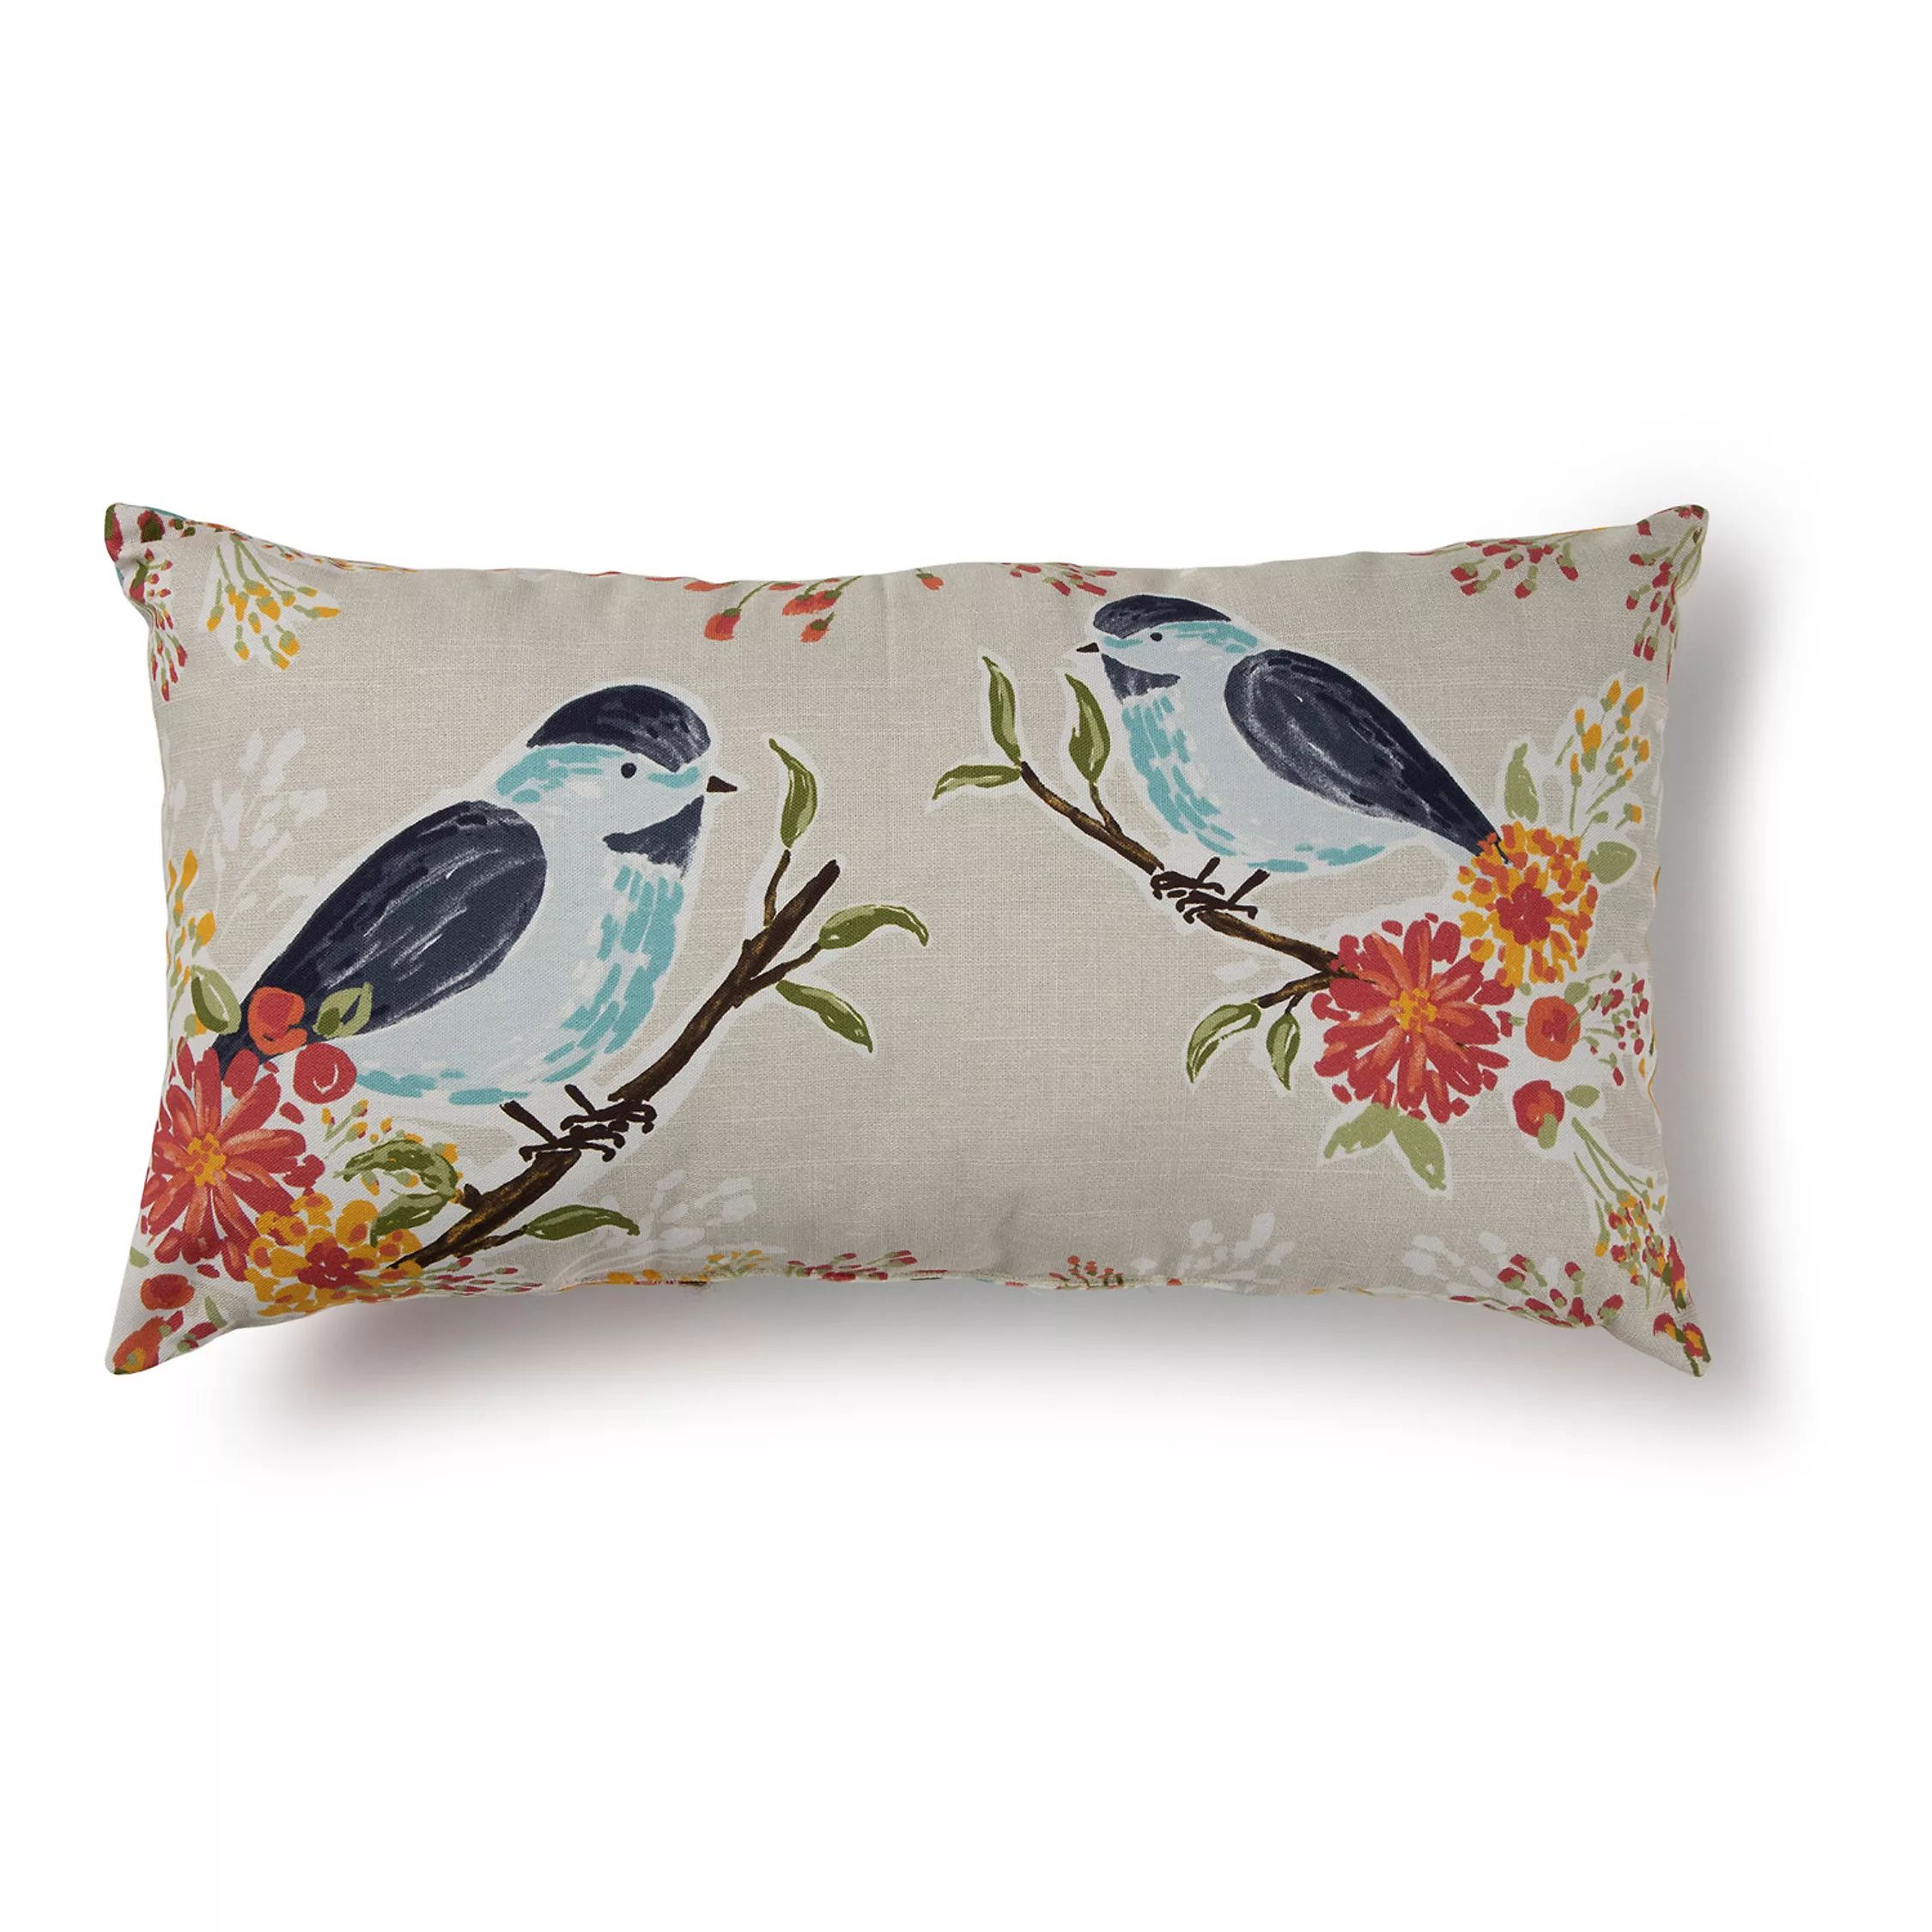 Sonoma Goods For Life® Floral Birds Indoor Outdoor Oblong Throw Pillow | Kohl's